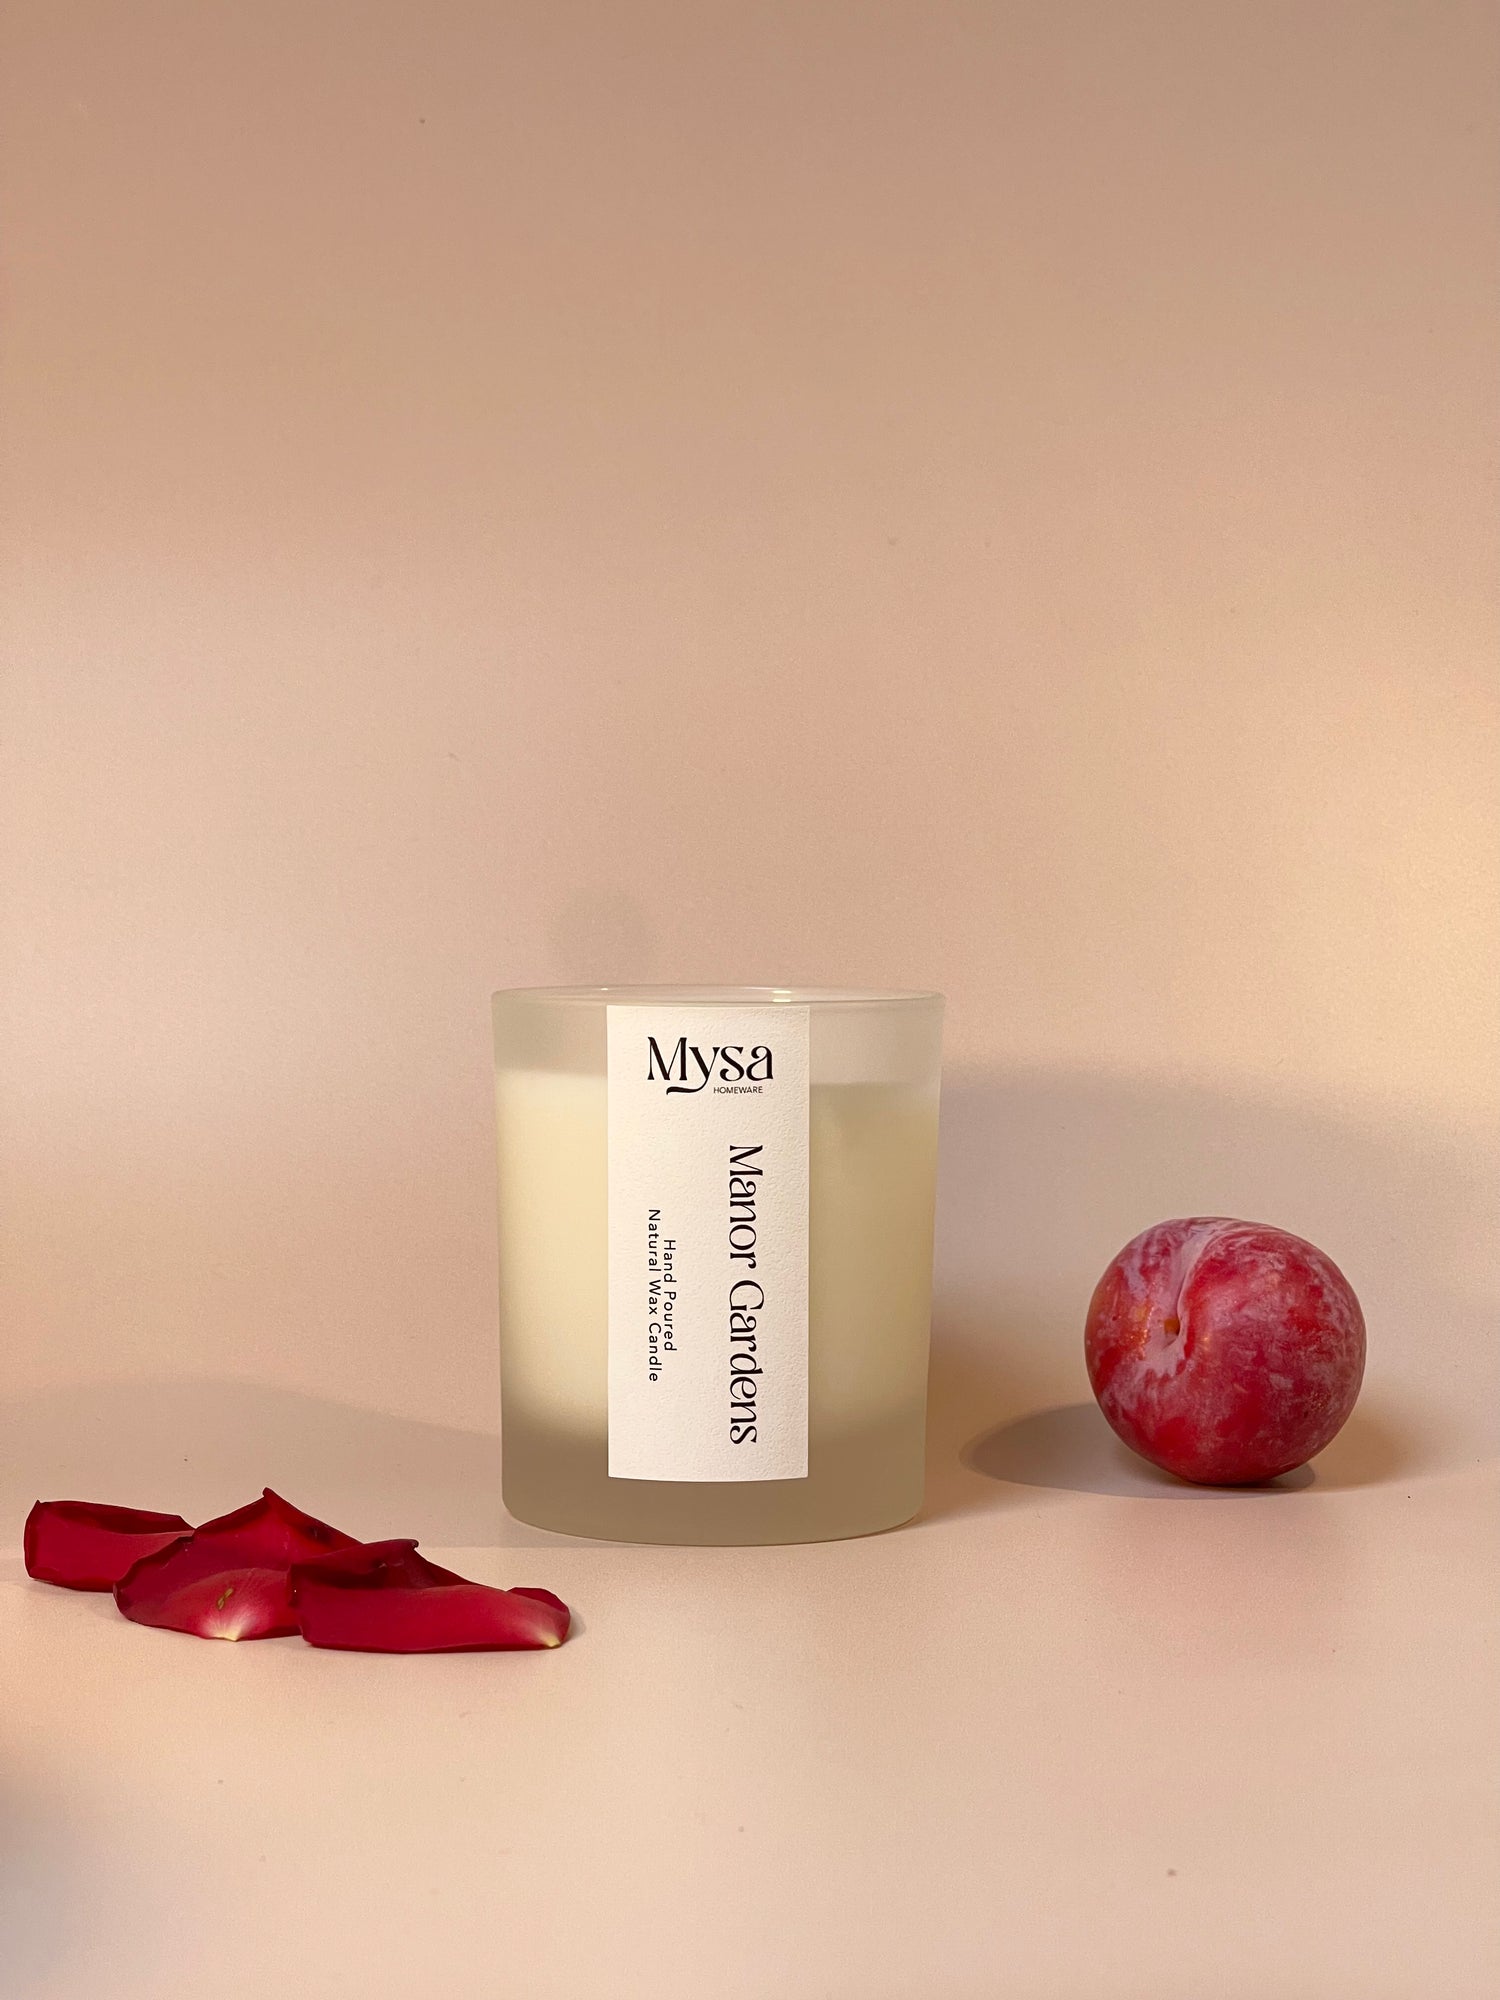 Manor Gardens luxury scented candle crafted from natural wax, featuring a delightful blend of damson plum, rose, and patchouli fragrance.